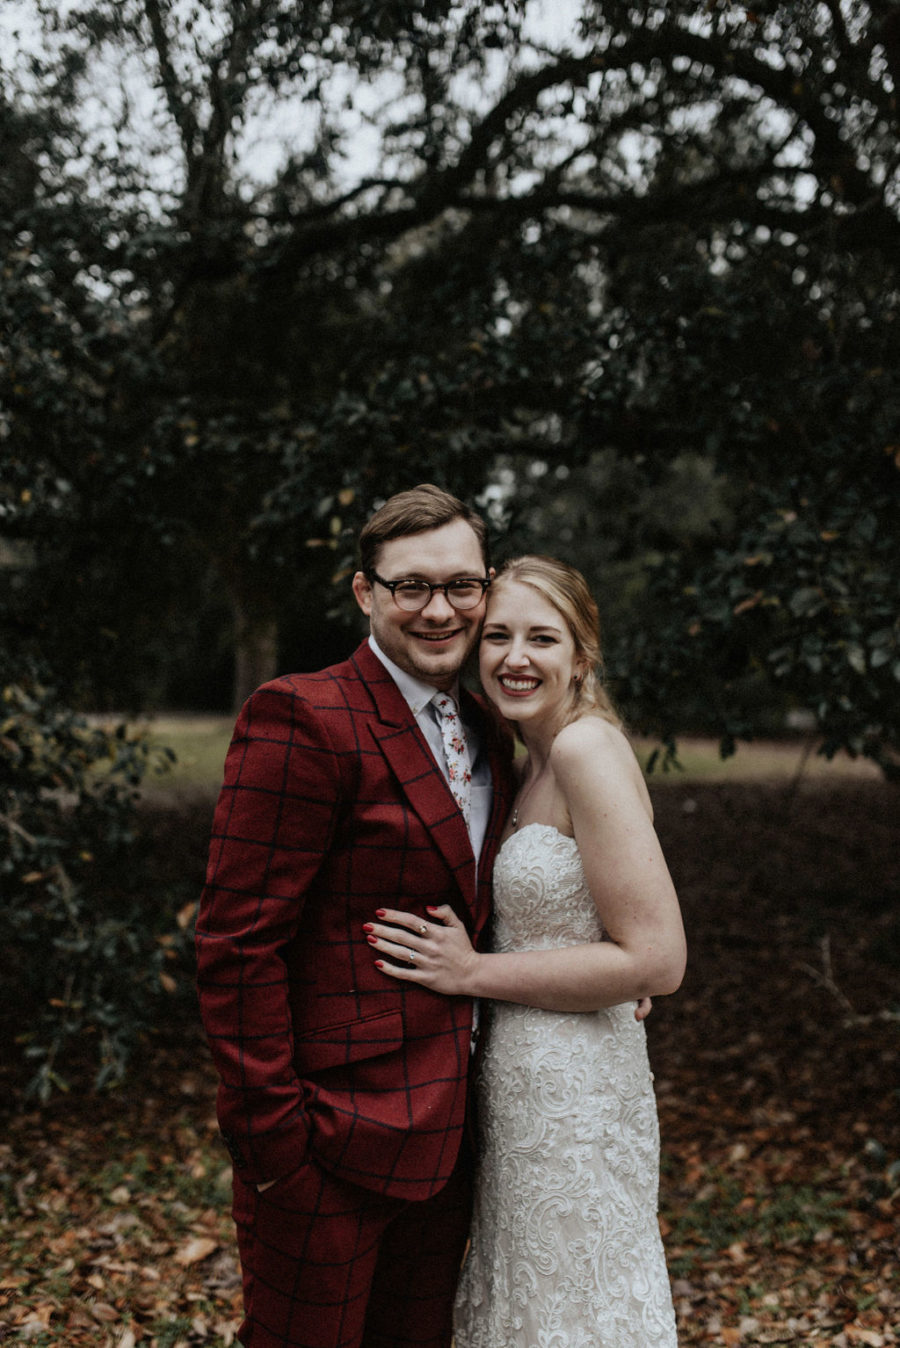 Magical Winter Wedding by Meghan Melia Photography featured on Nashville Bride Guide!